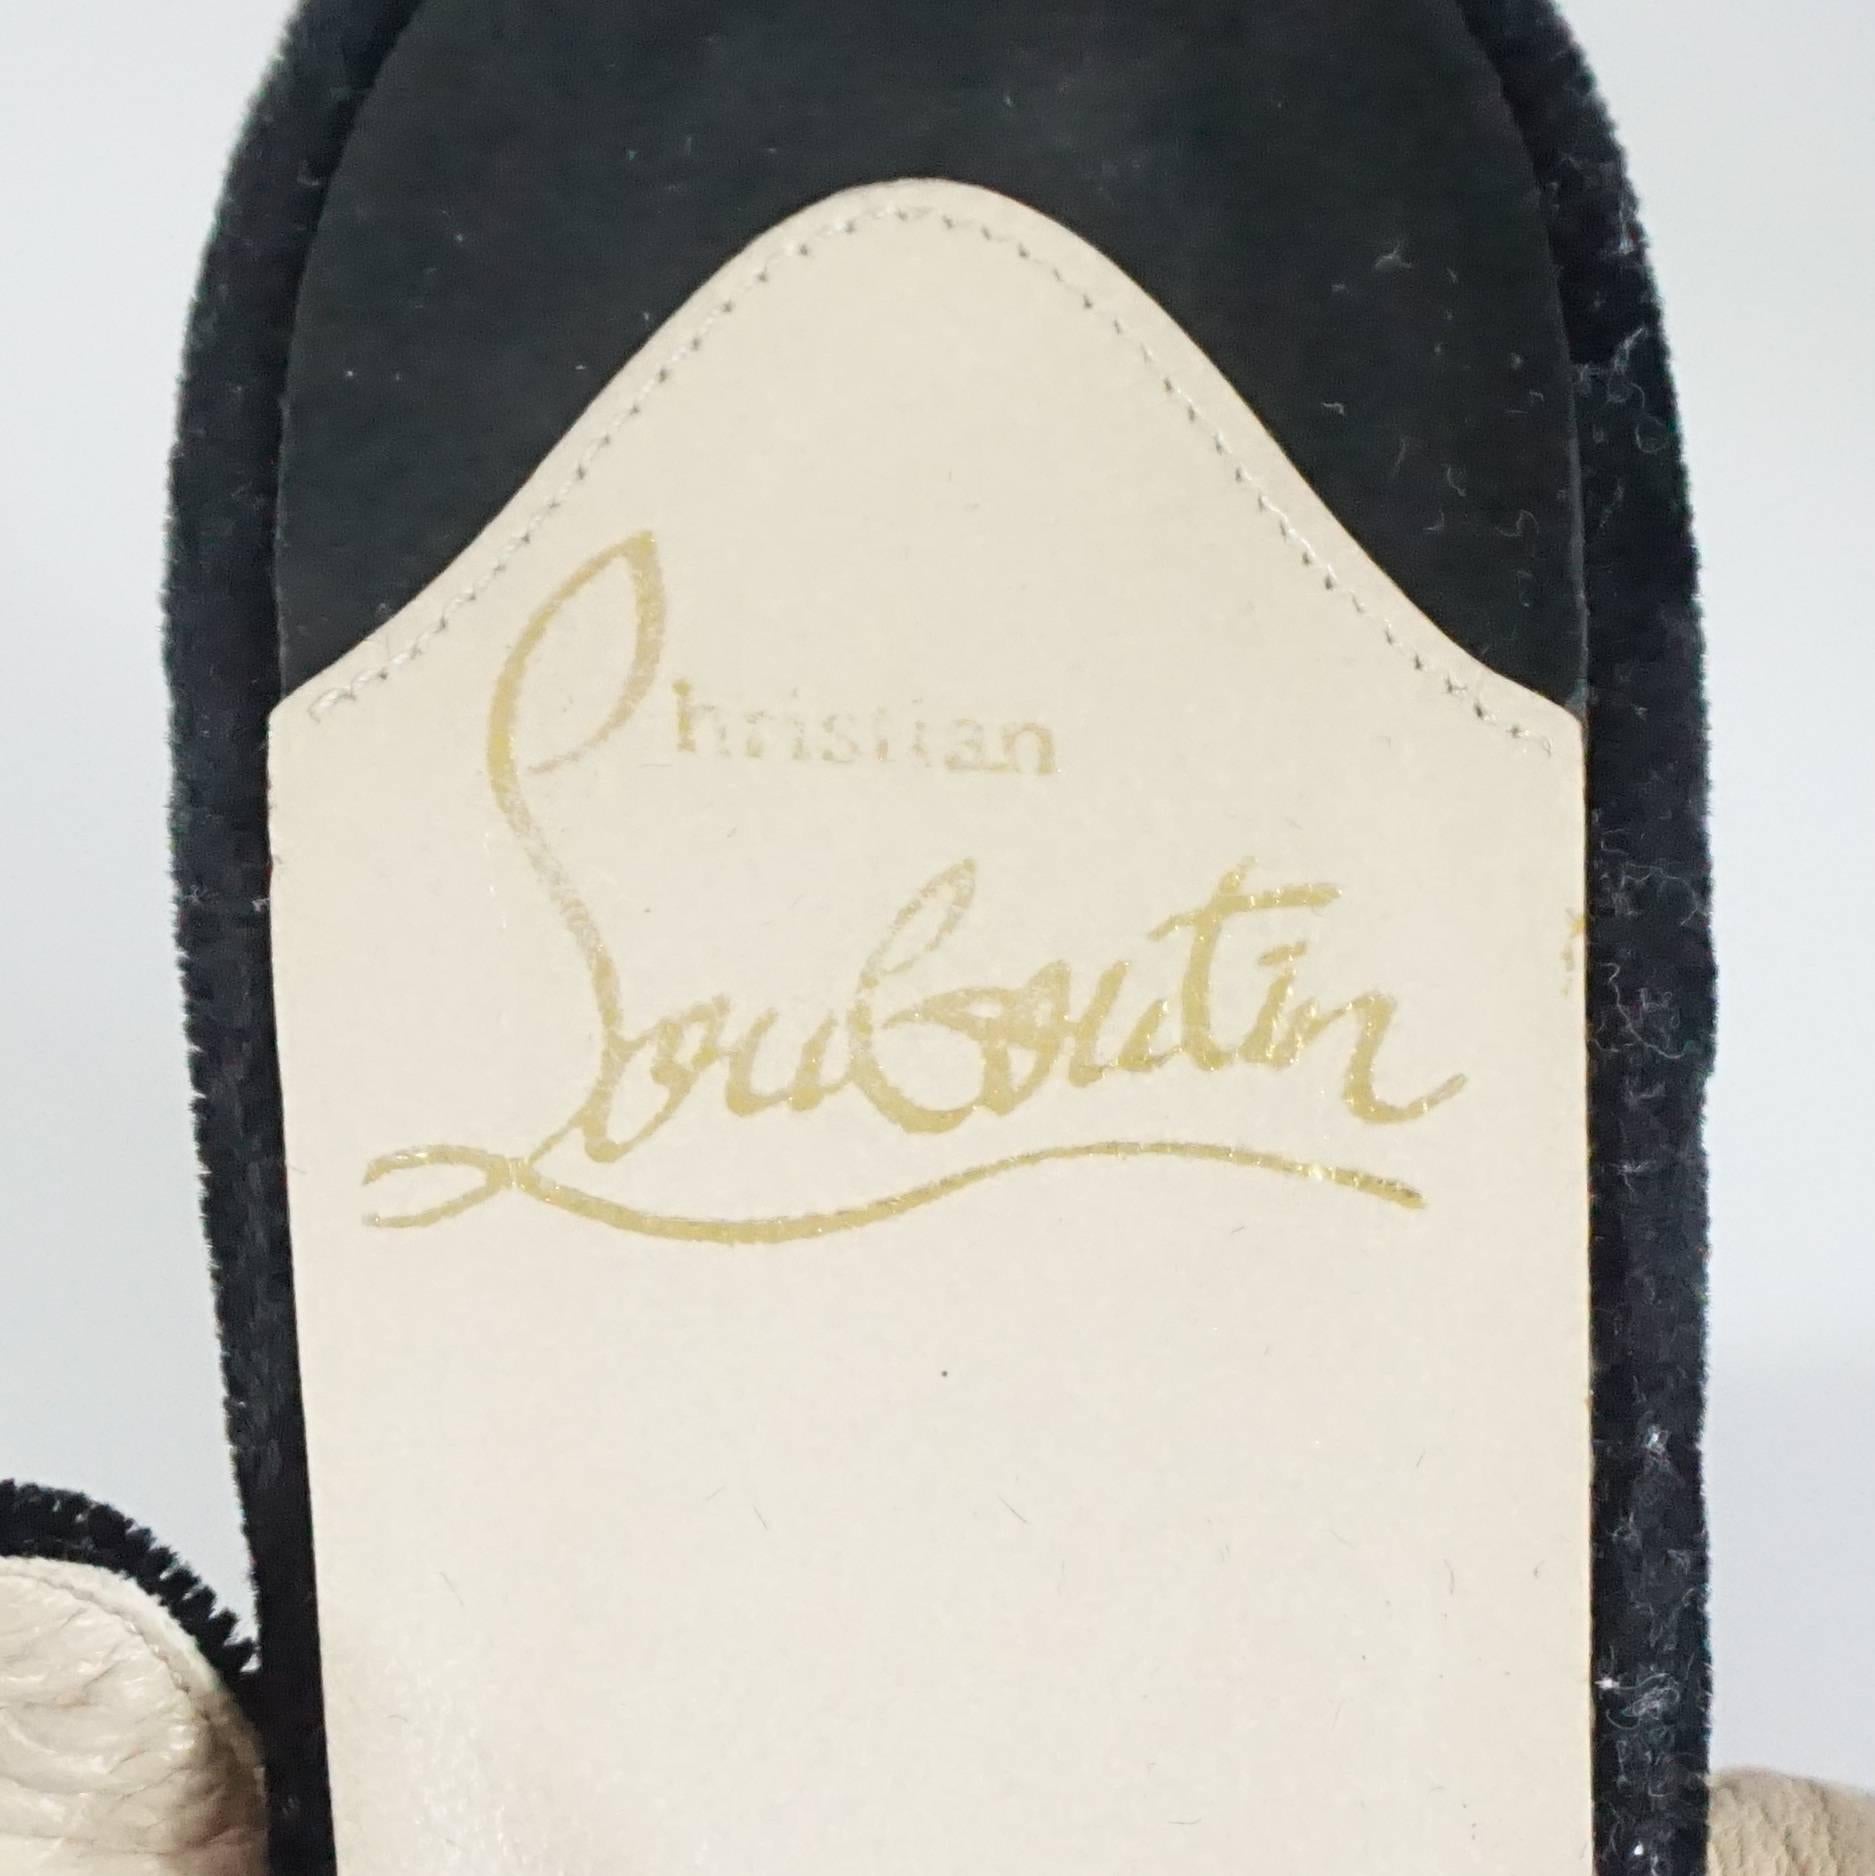 Christian Louboutin Black Velvet Ankle Strap Sandal with Chunky Heel-37 In Excellent Condition For Sale In West Palm Beach, FL